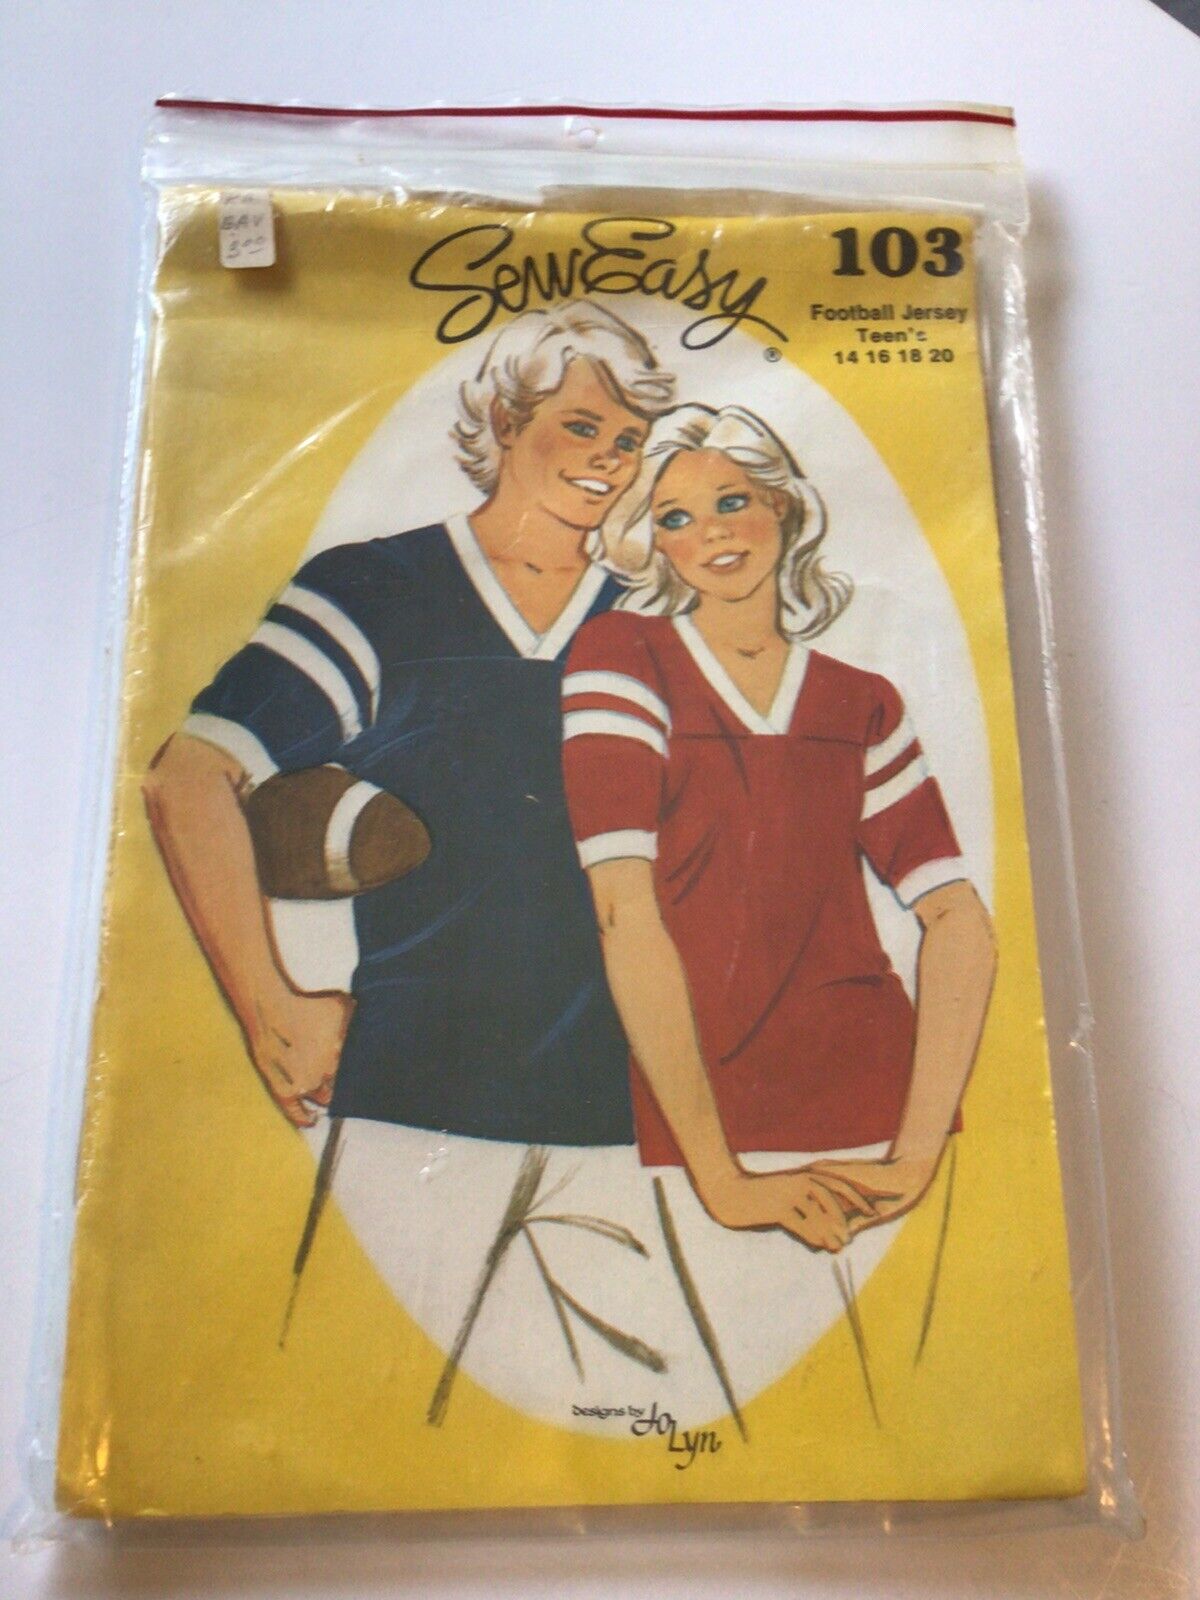 1 Vintage (1982) But New Sew Easy Pattern 103 Teens Shirt Sizes 14 16 18 20